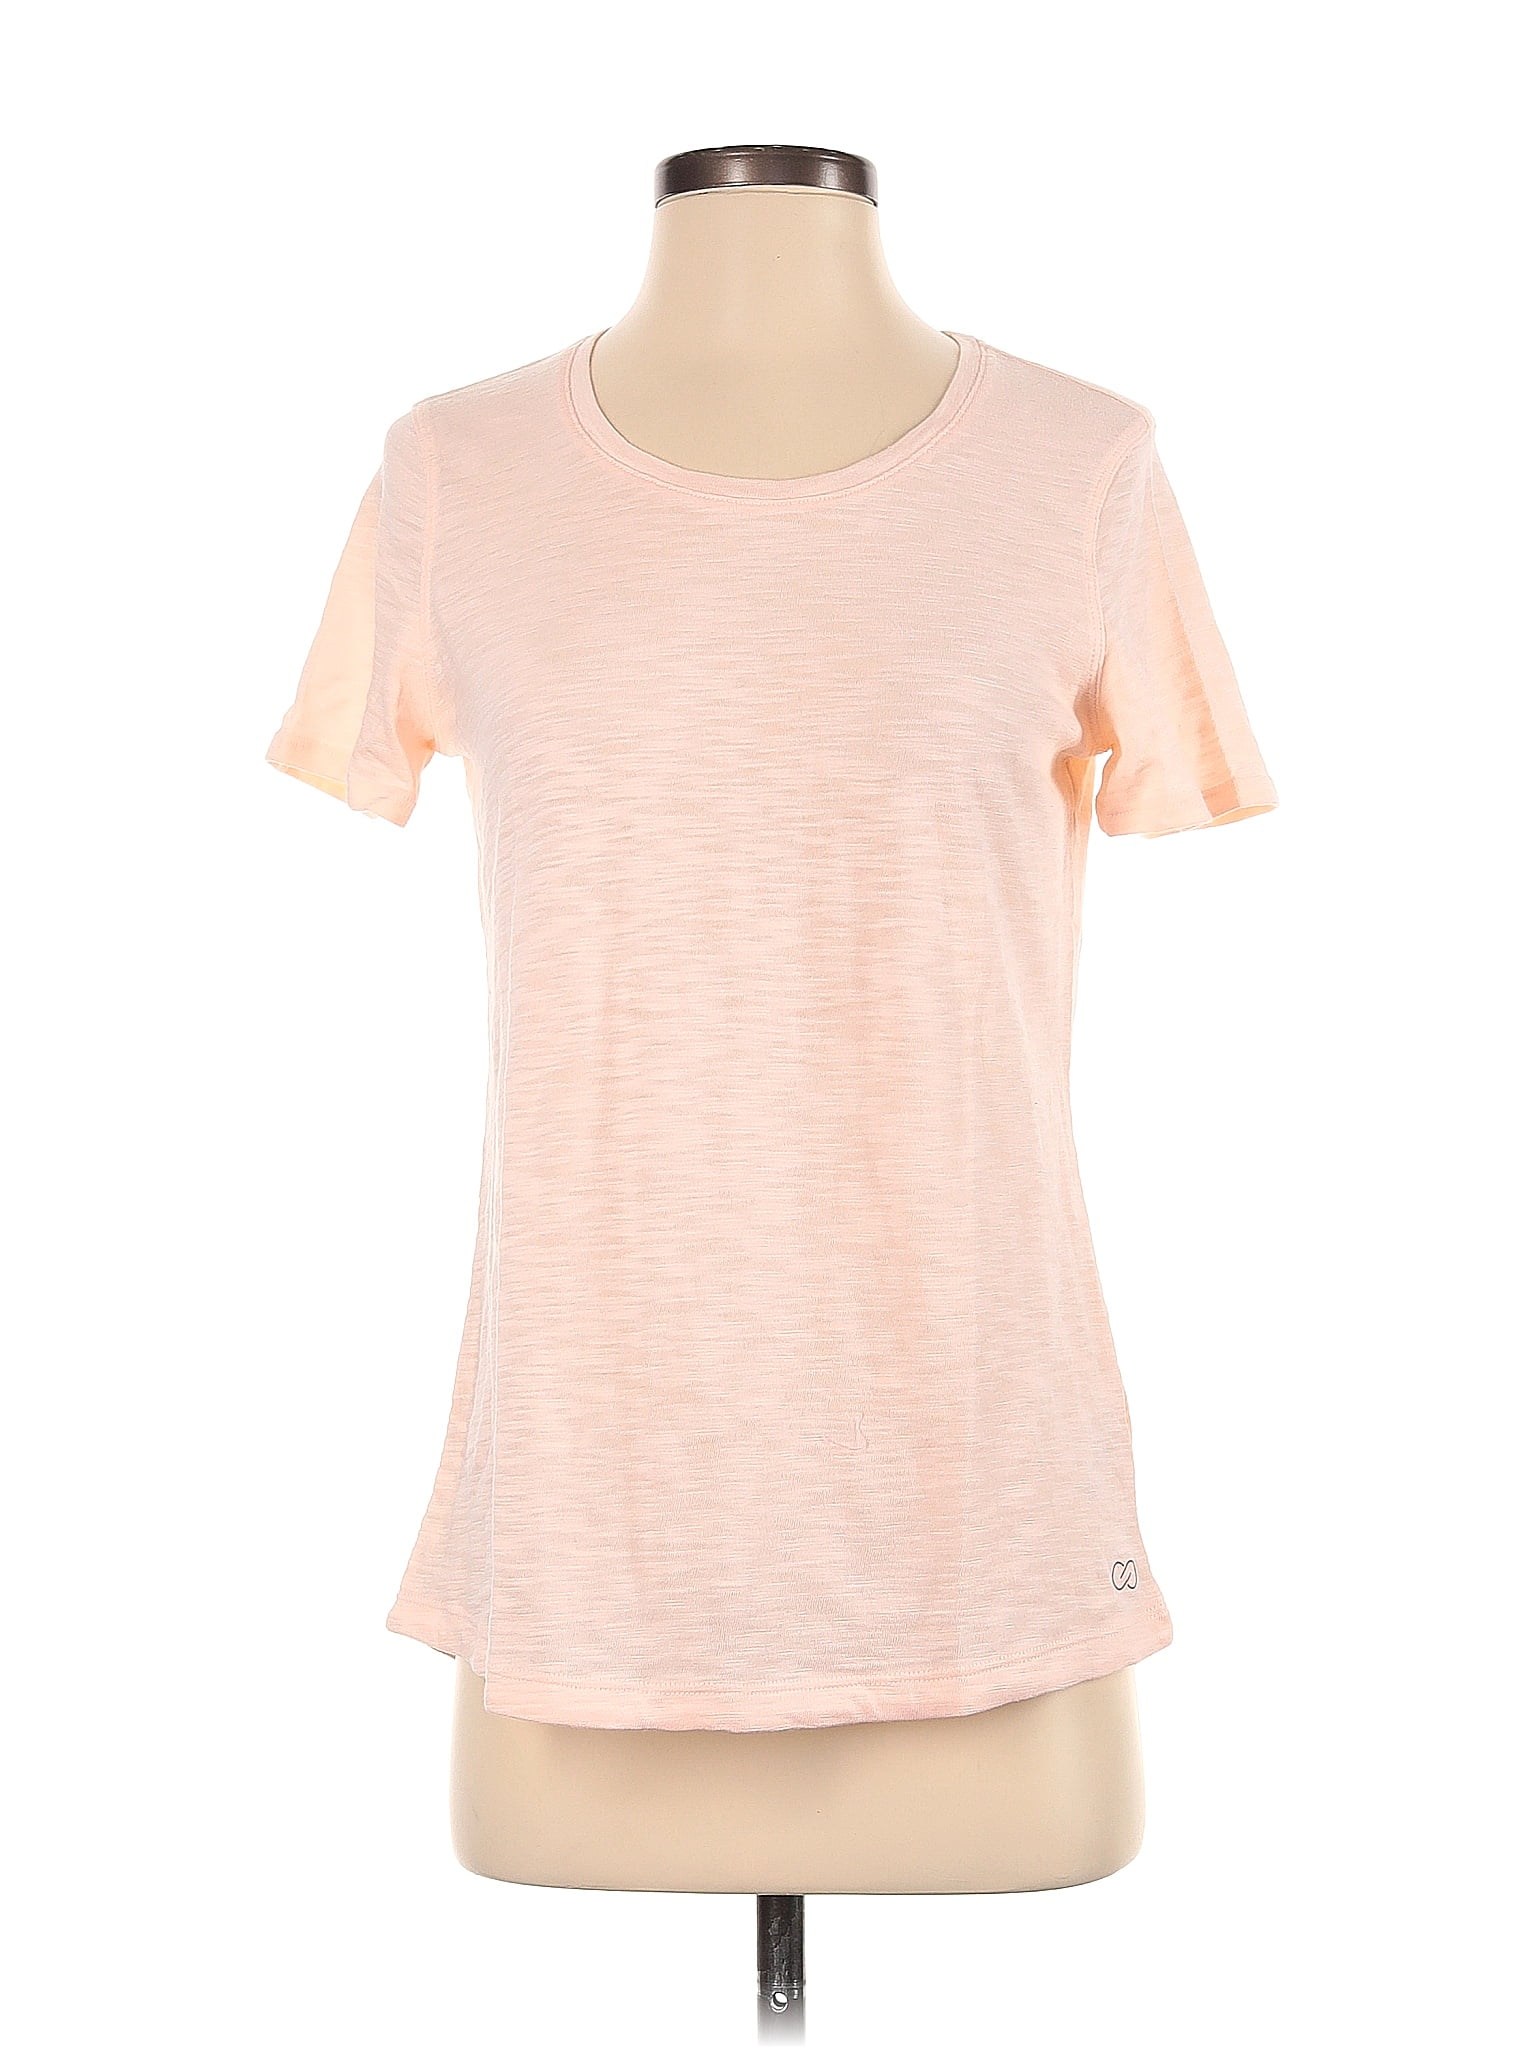 Calia by Carrie Underwood Pink Short Sleeve T-Shirt Size S - 45% off